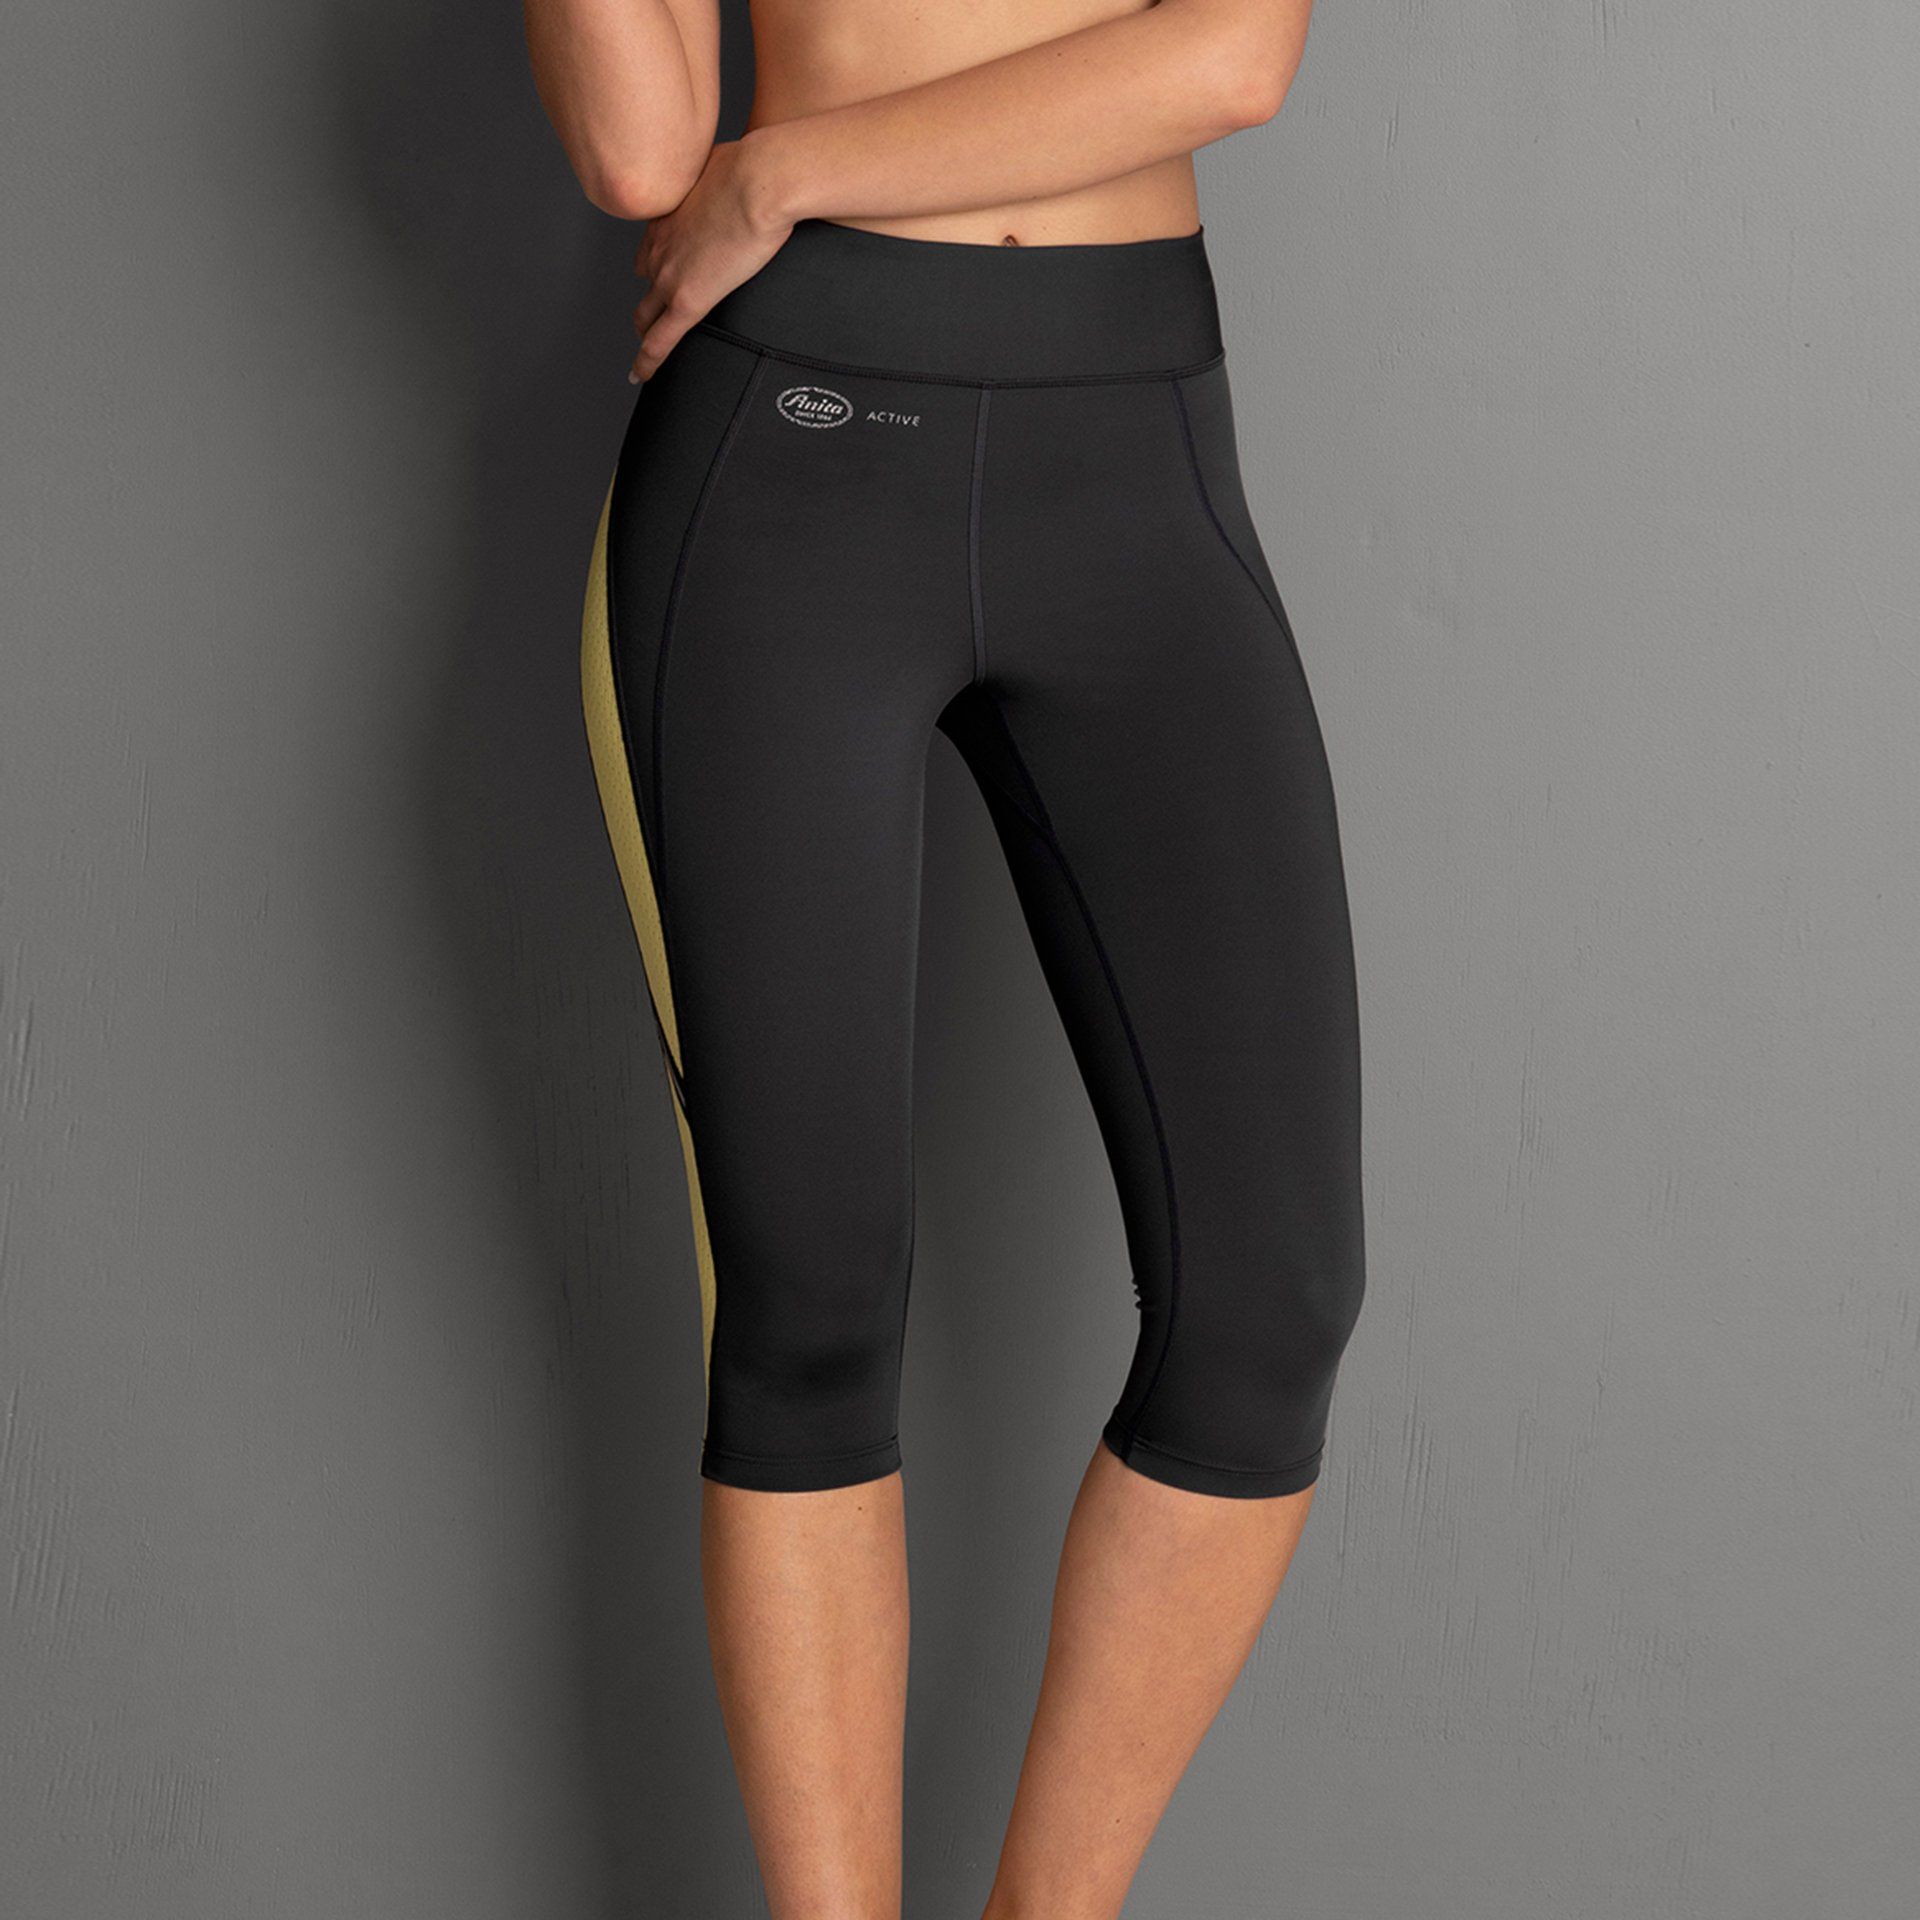 Anita-Sporthose Fittness, Firm Support A3